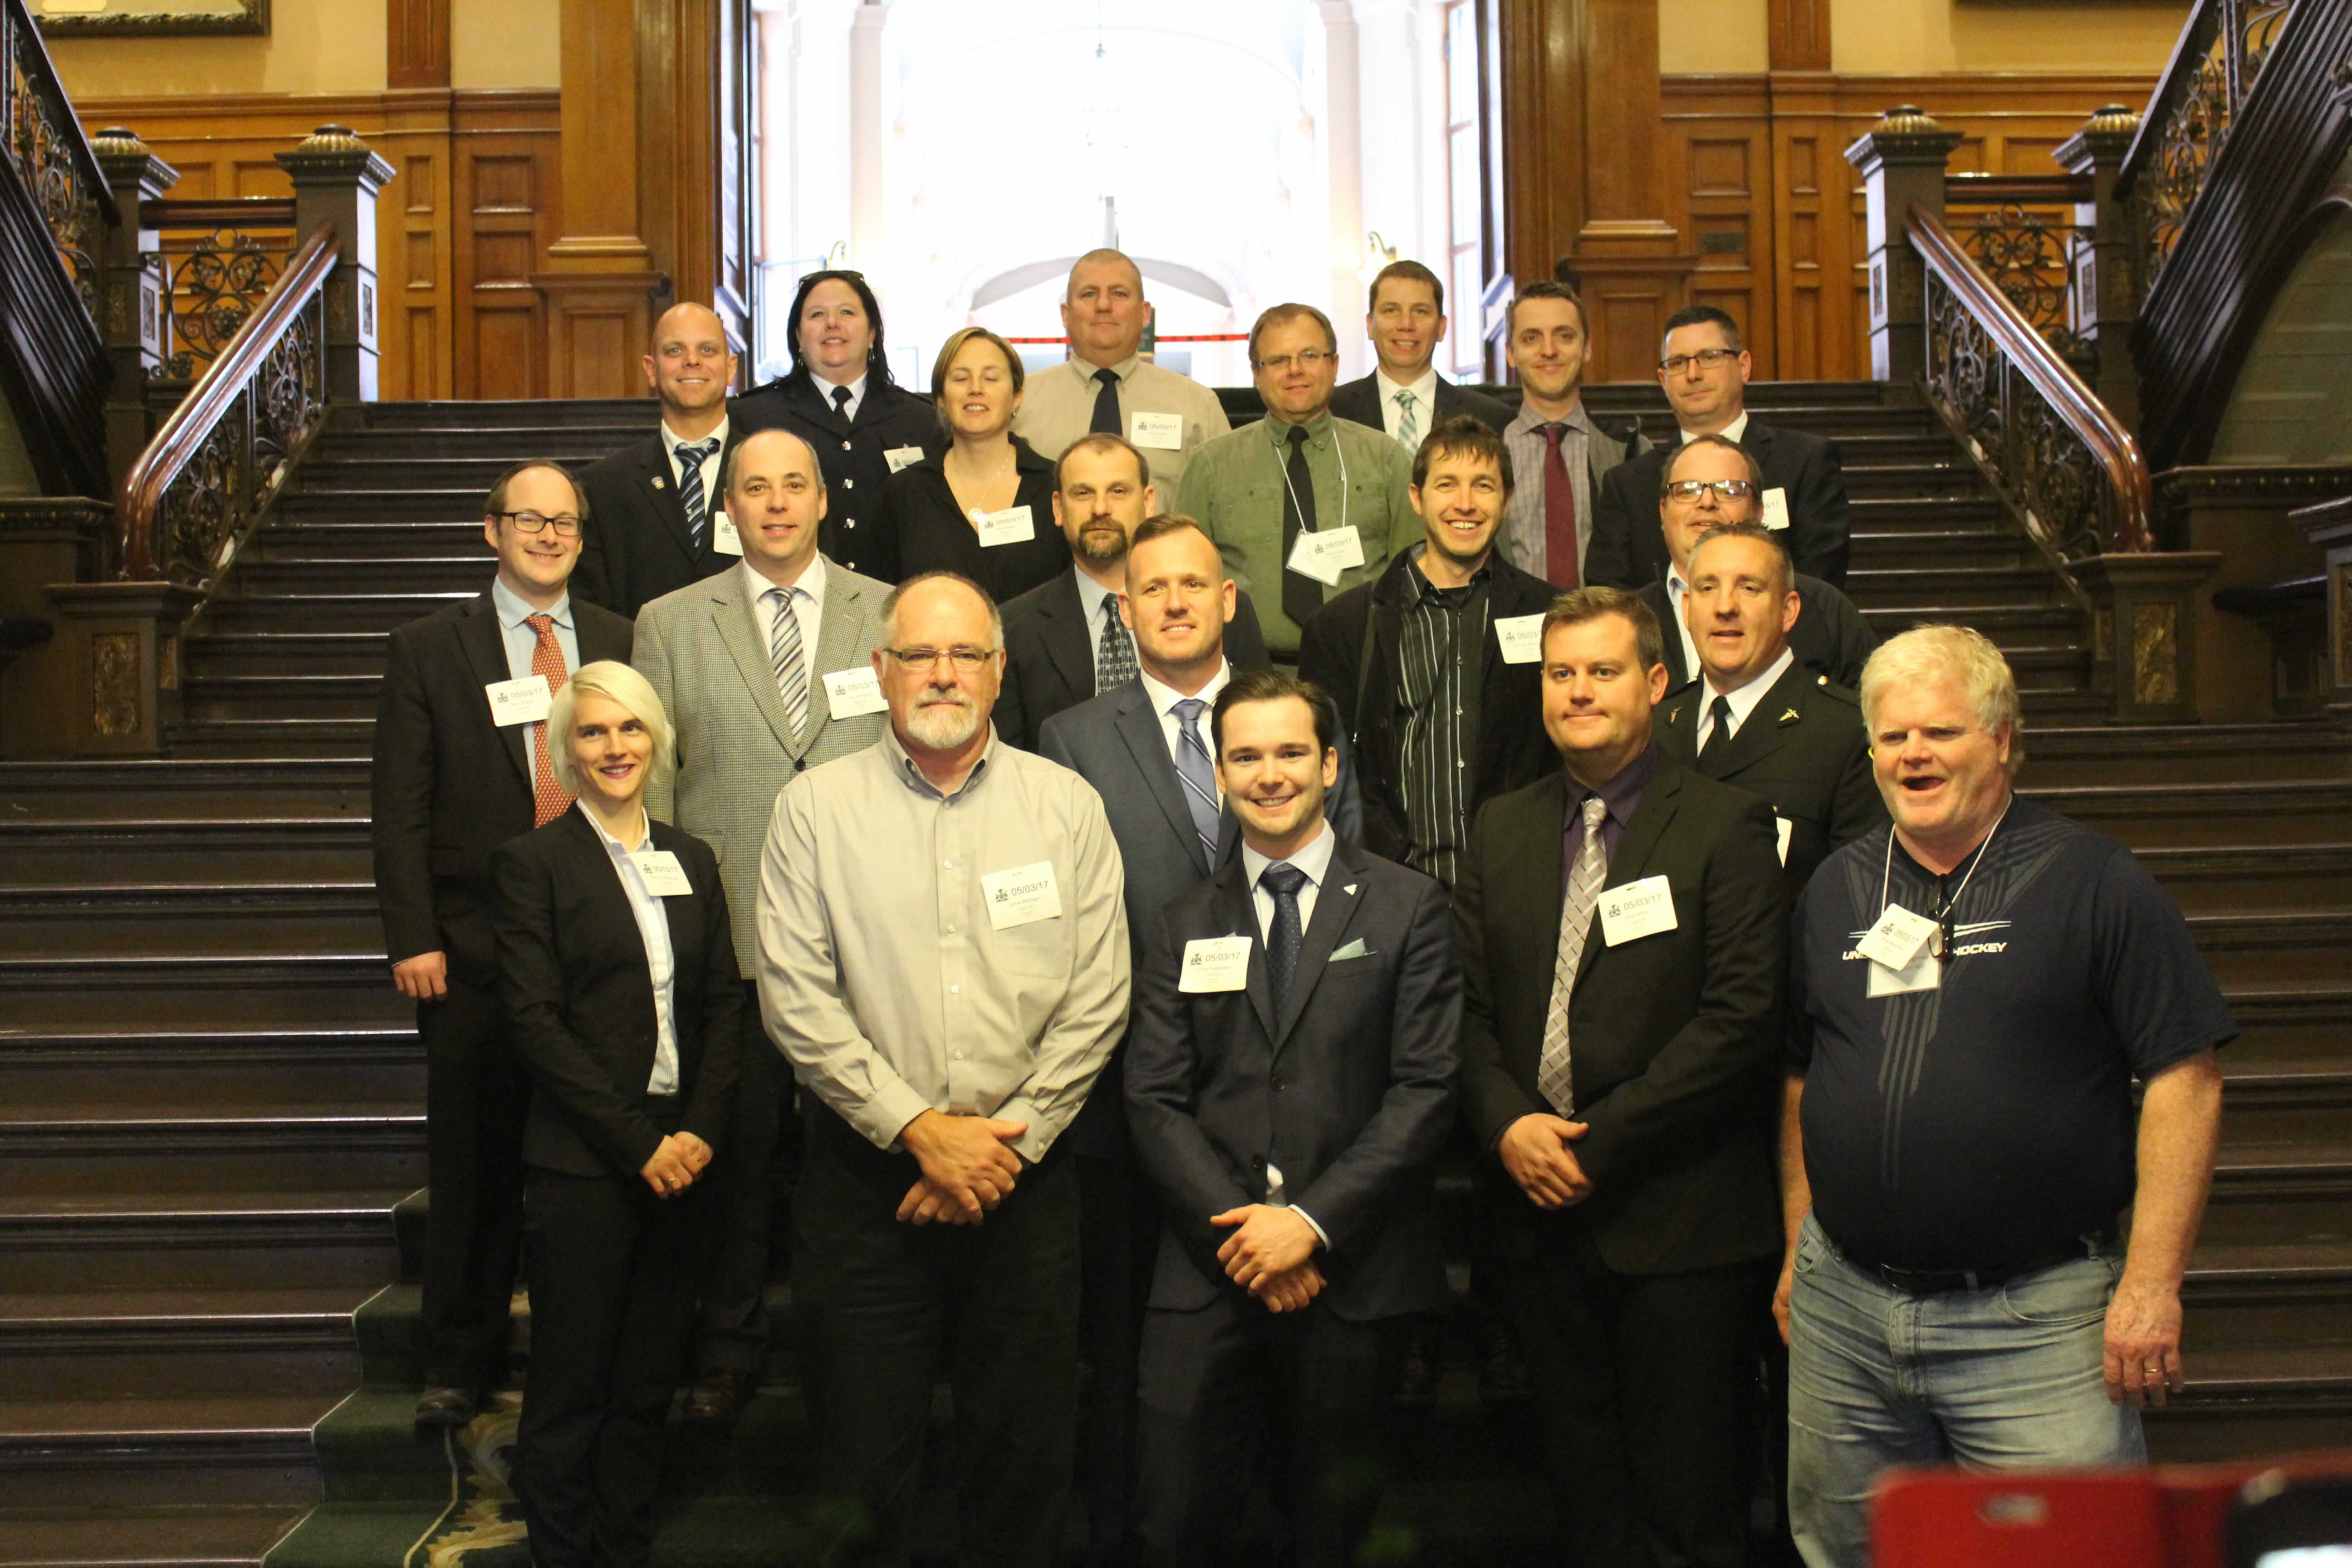 OPSEU Paramedic members pose on the stairs at Queen's Park during a lobby day.